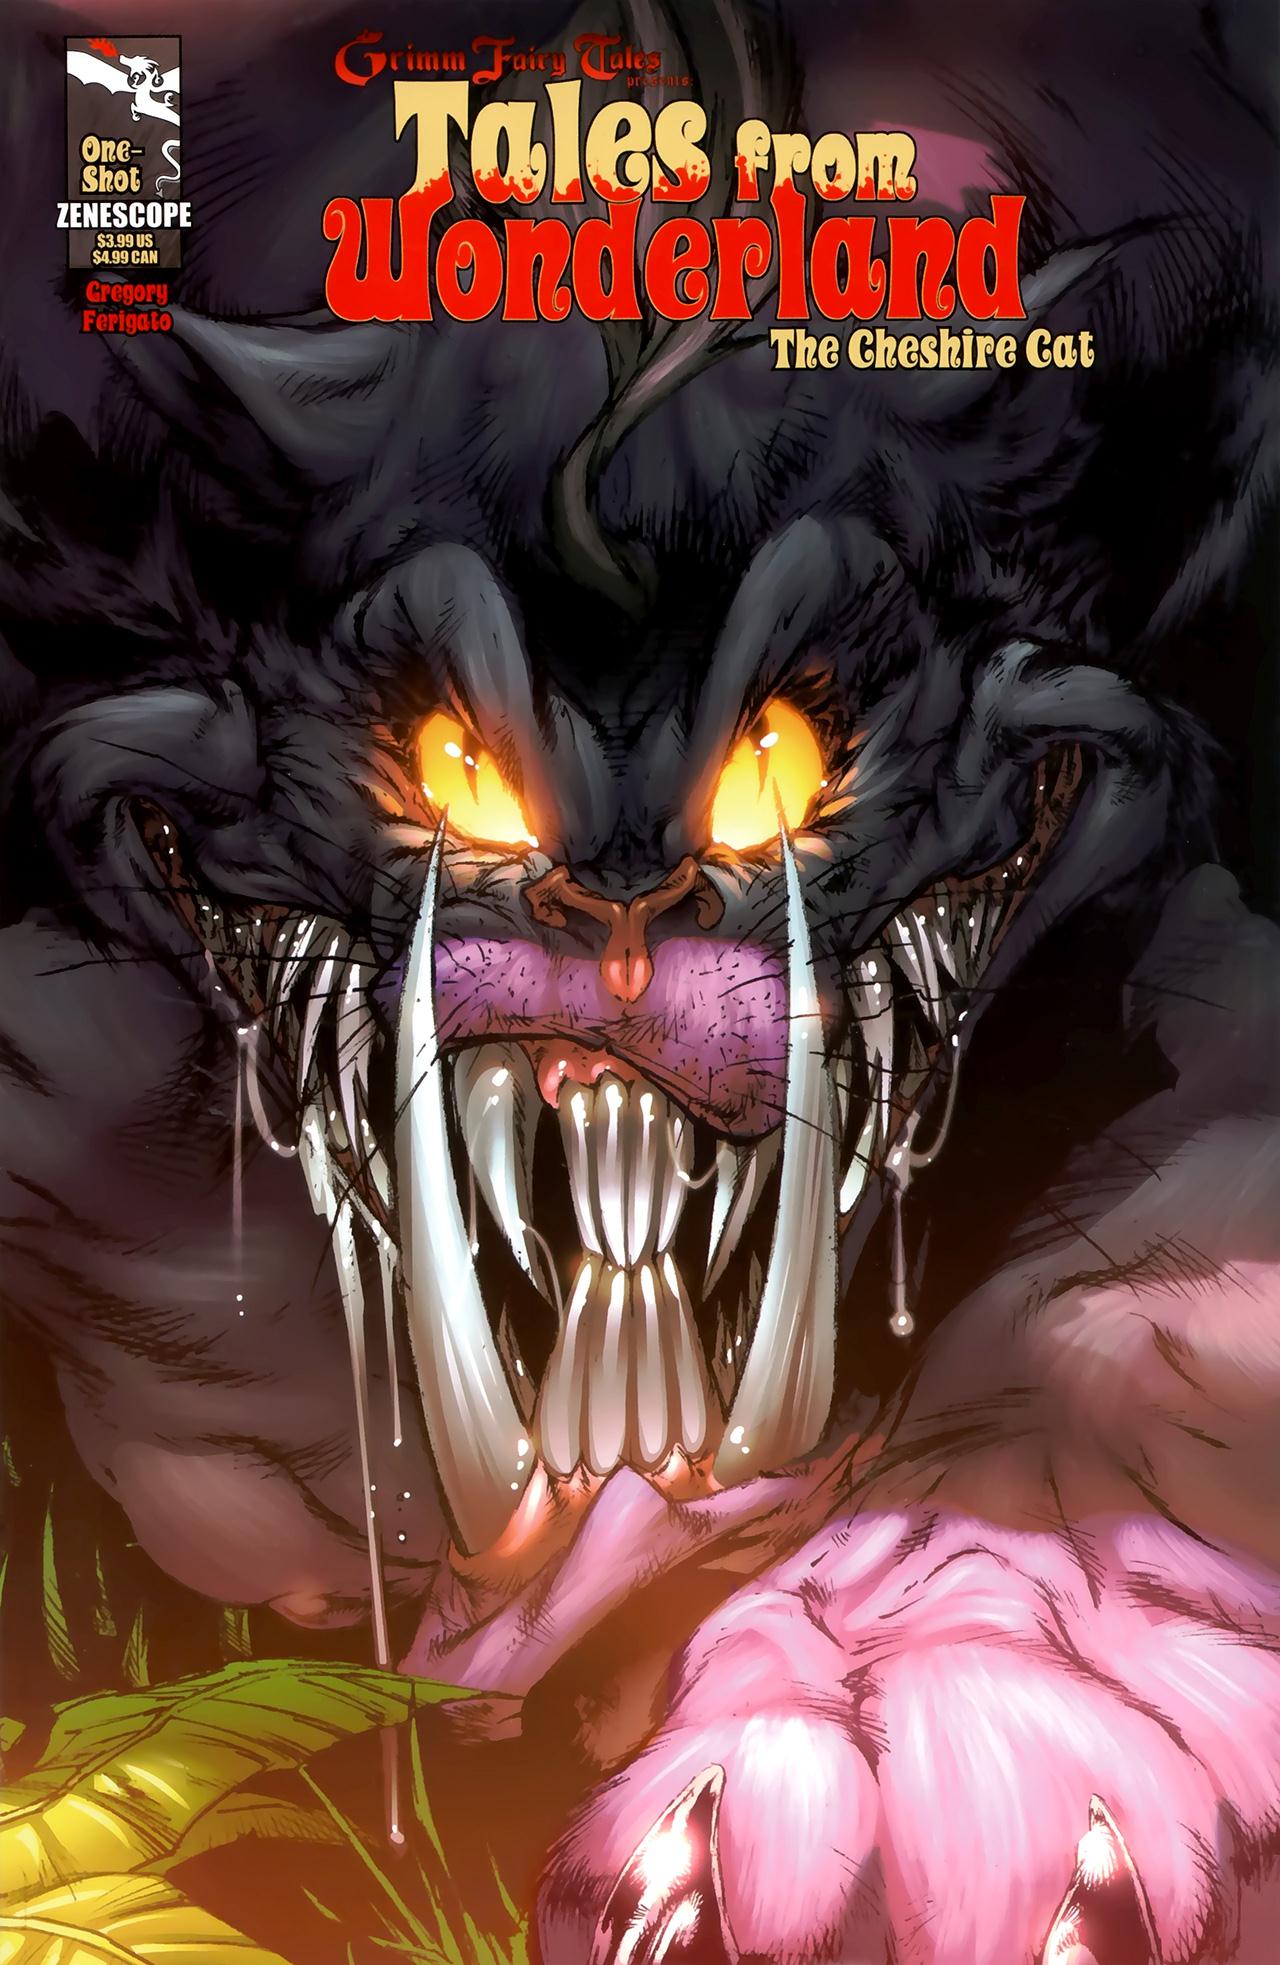 Grimm Fairy Tales presents Tales from Wonderland 04 - 10